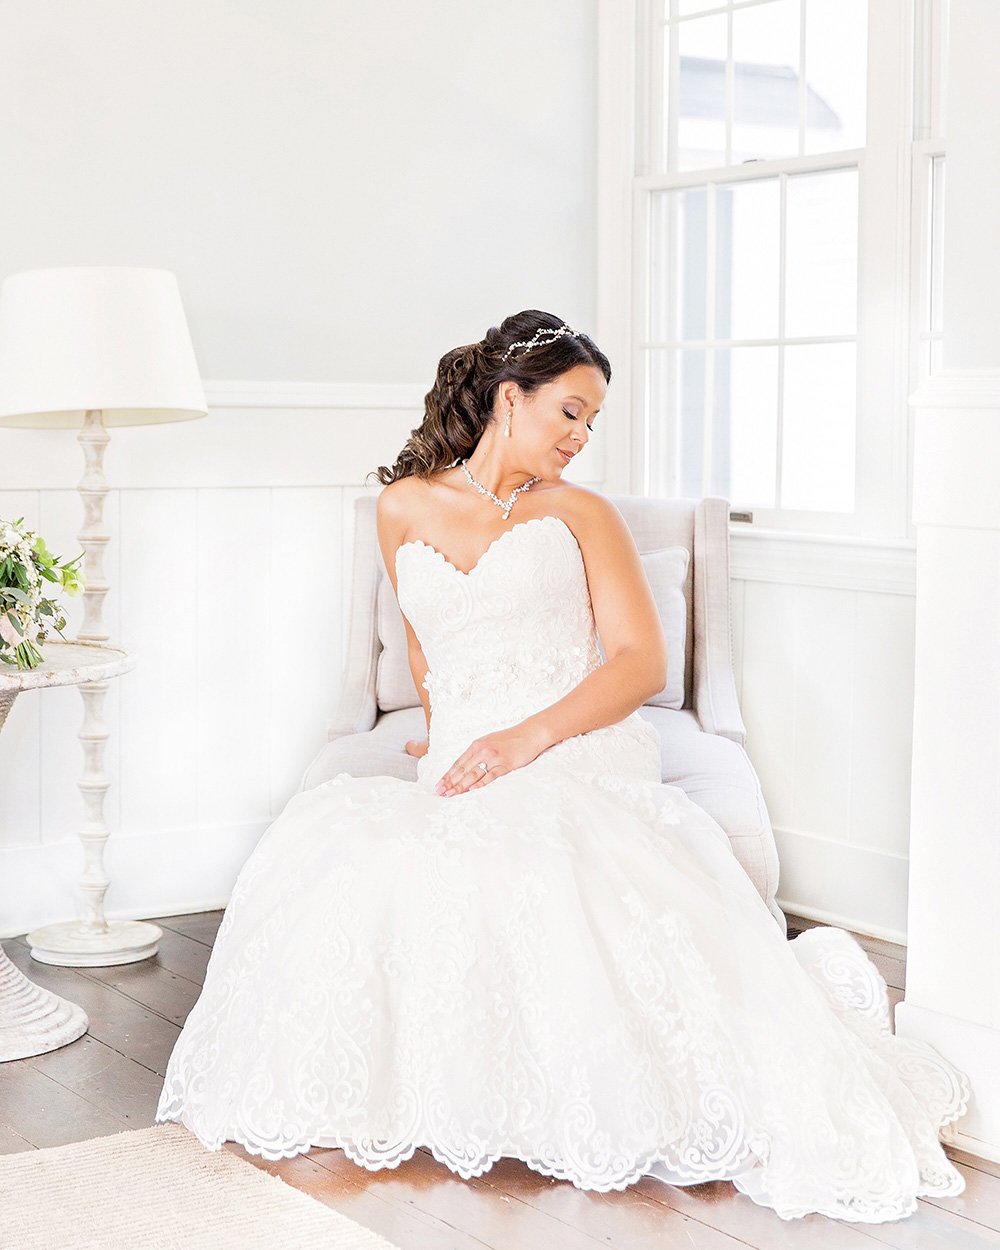 Wedding Dress by Wedding Photographer Leah Marie Photography + Stationery